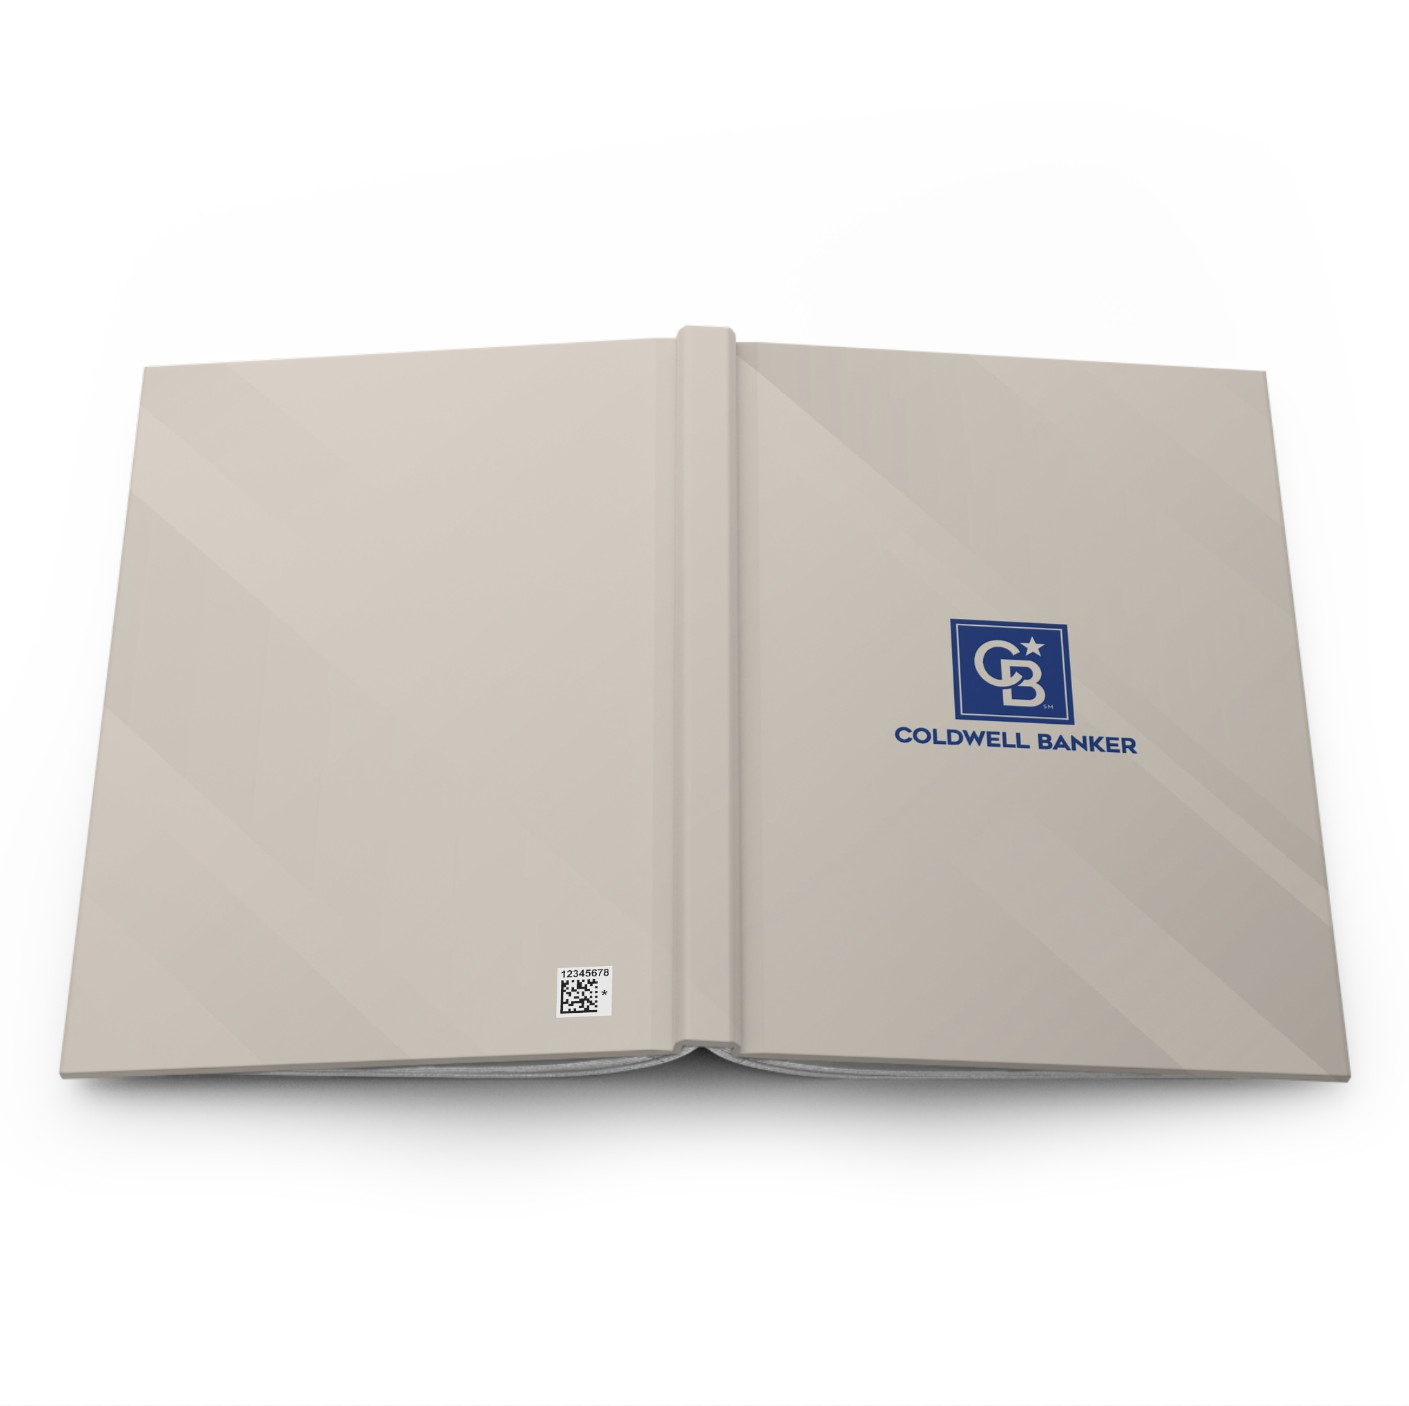 Coldwell Banker Full Color Hardcover Binders Linen print (from as low as $10.46 per cover)